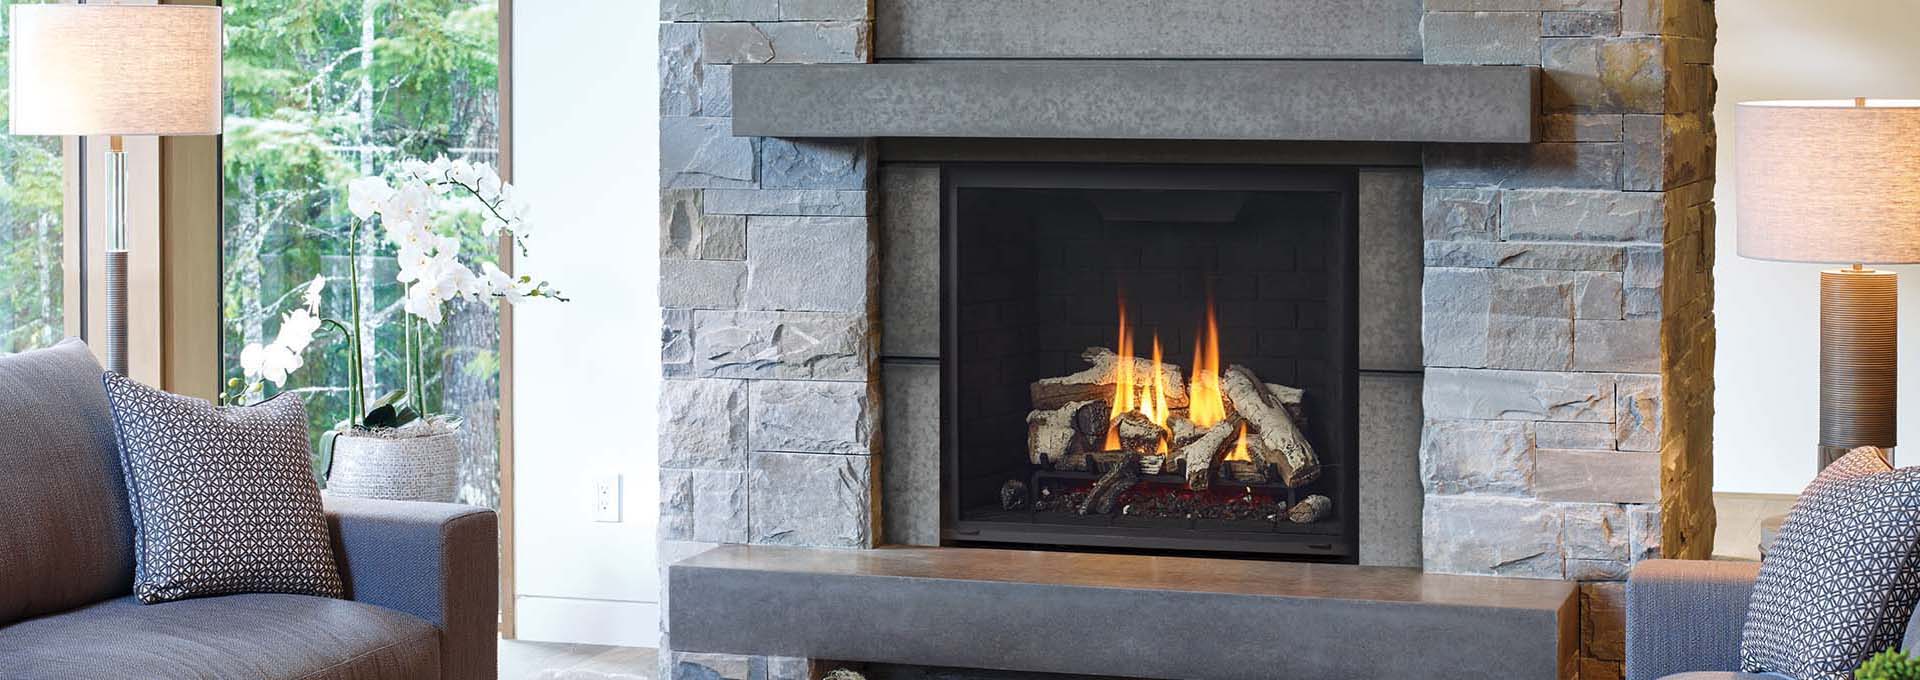 High Quality Fireplaces Inserts, How Big Should A Hearth Be For Gas Fireplace